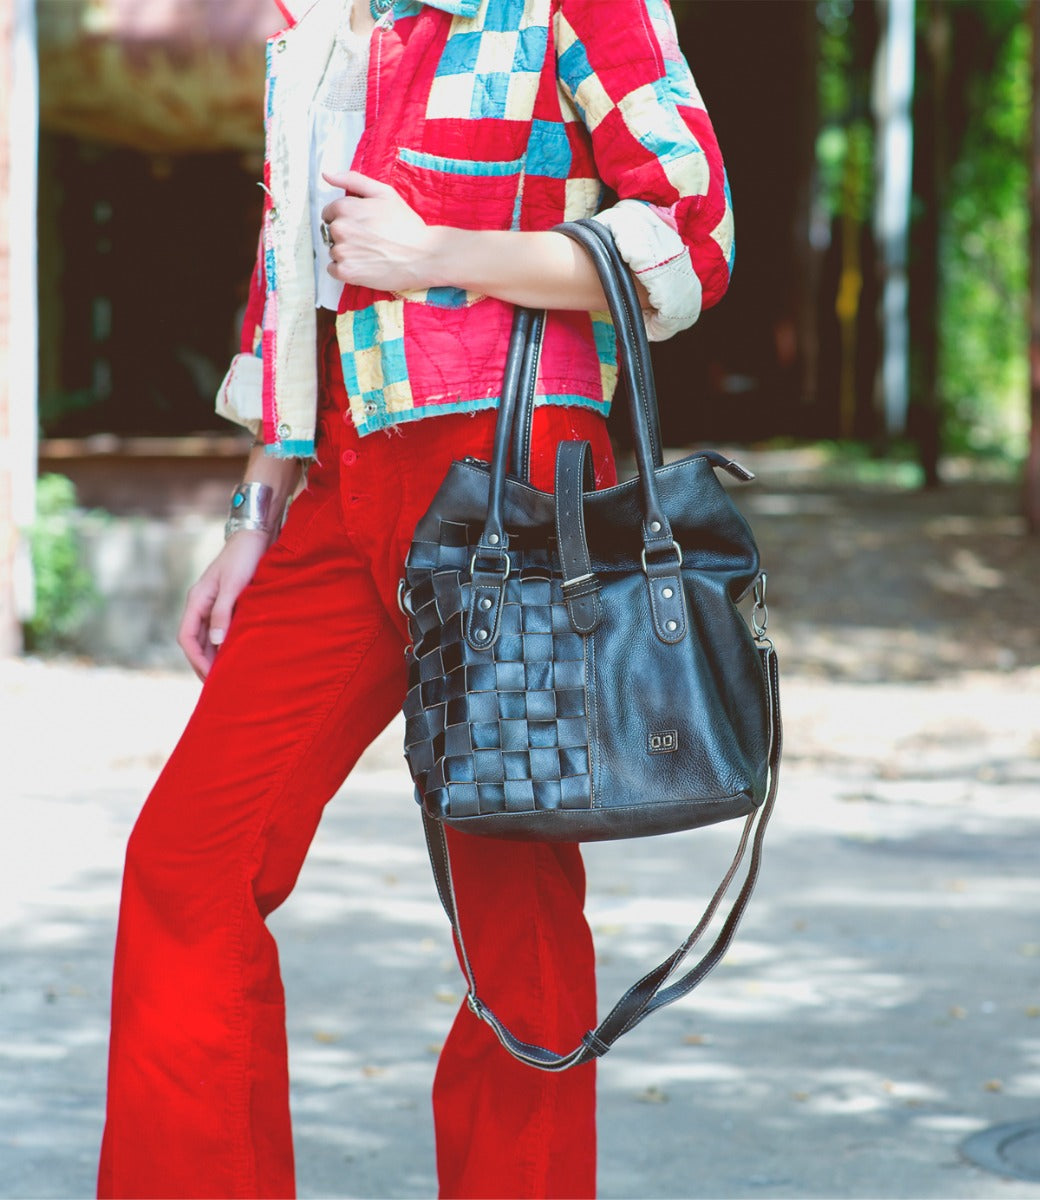 A woman wearing red pants holding a Rachel bag from Bed Stu.